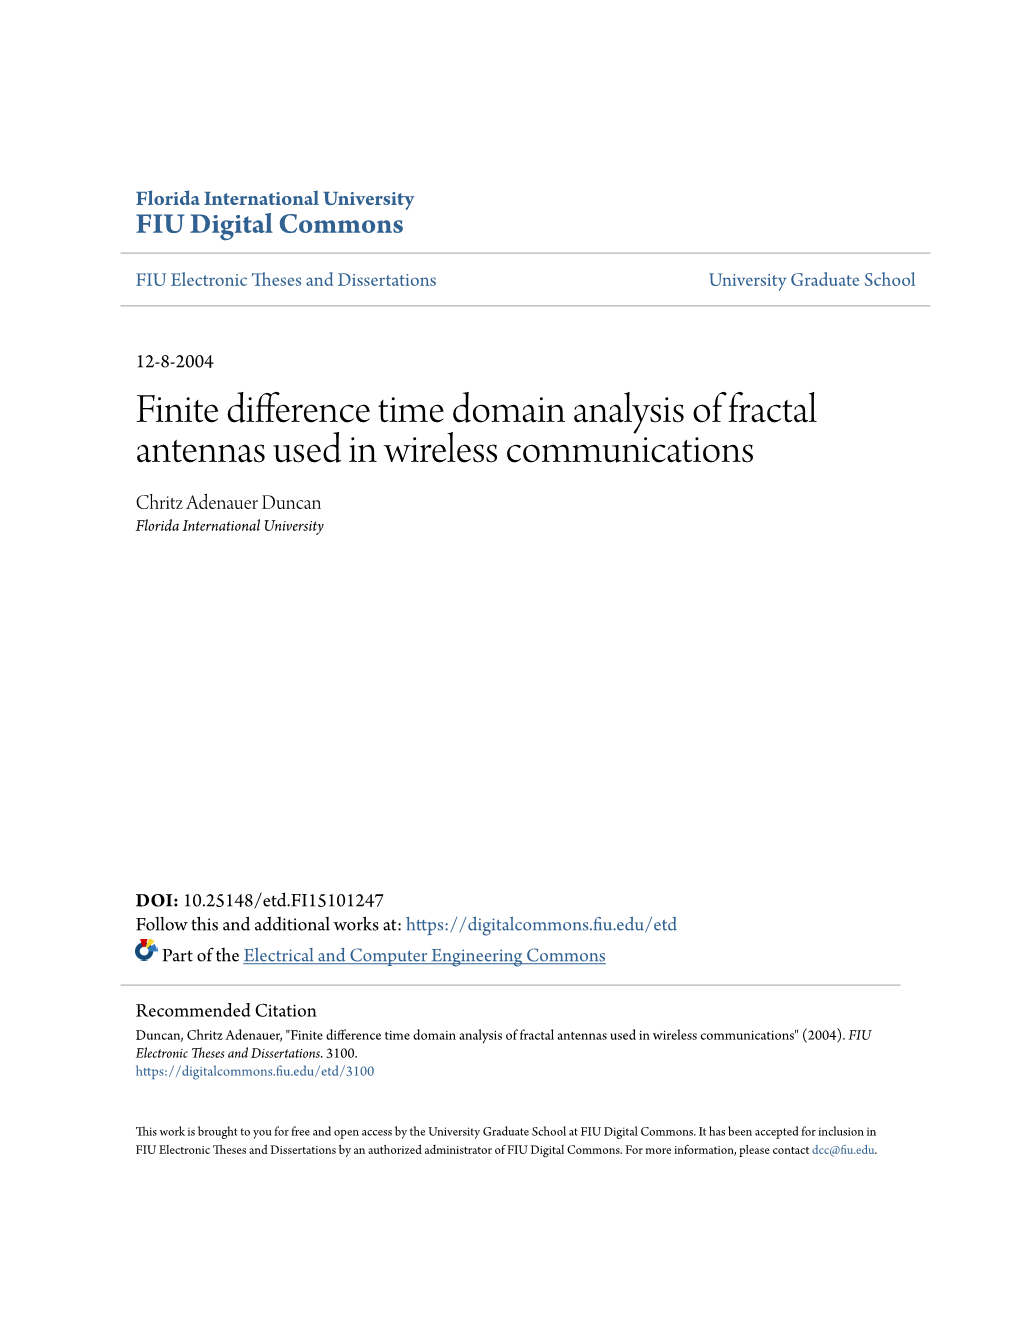 Finite Difference Time Domain Analysis of Fractal Antennas Used in Wireless Communications Chritz Adenauer Duncan Florida International University